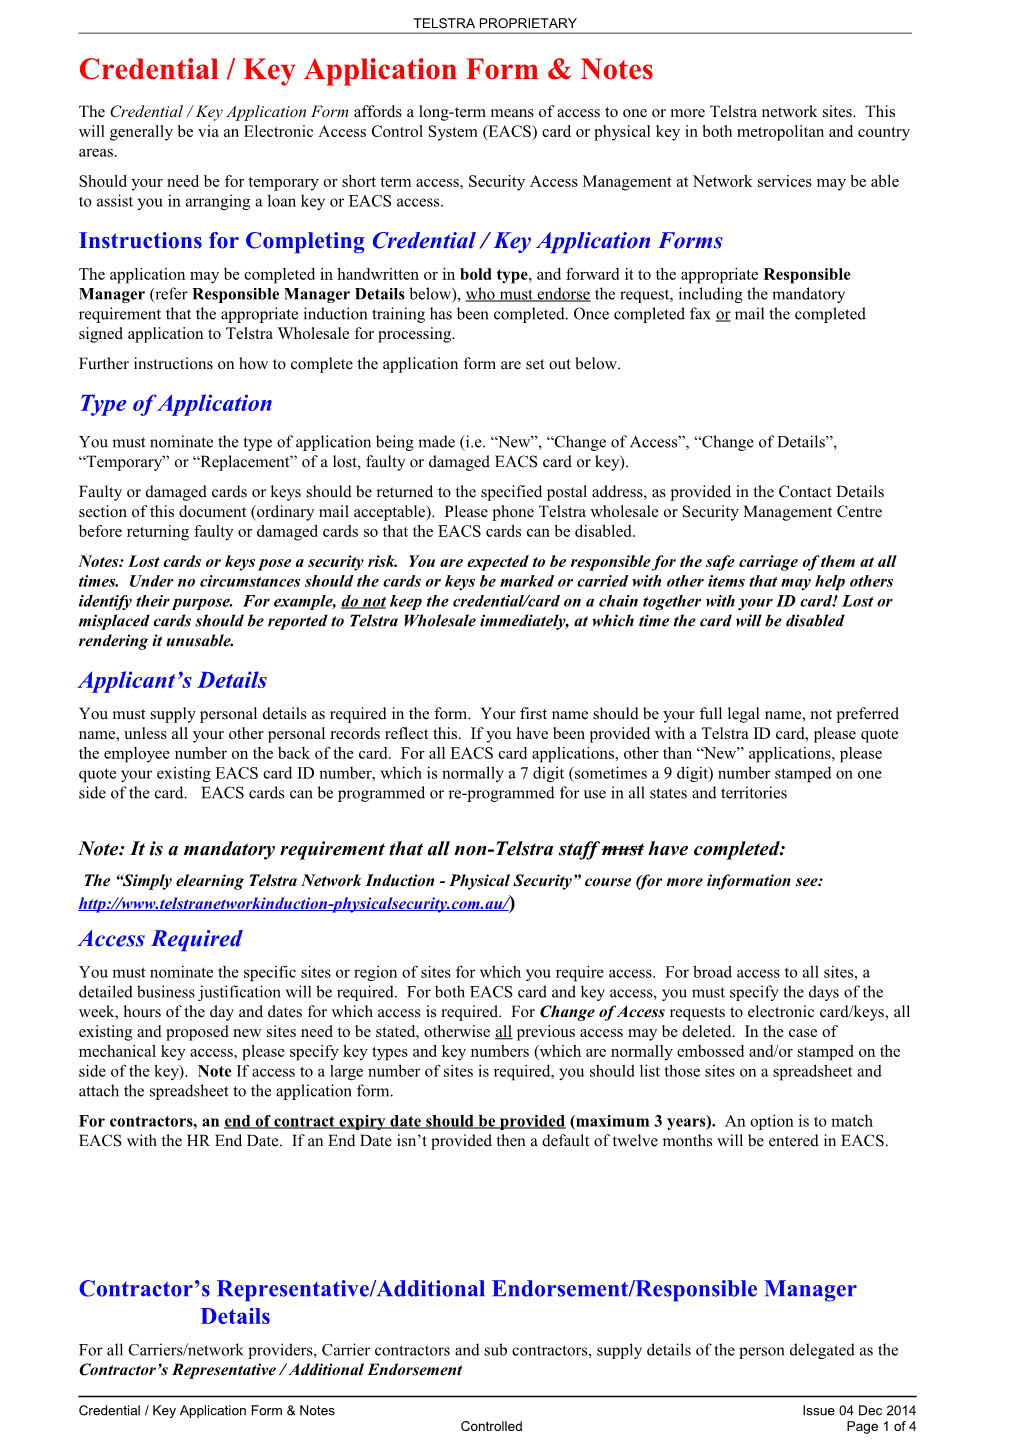 Credential / Key Application Form & Notes